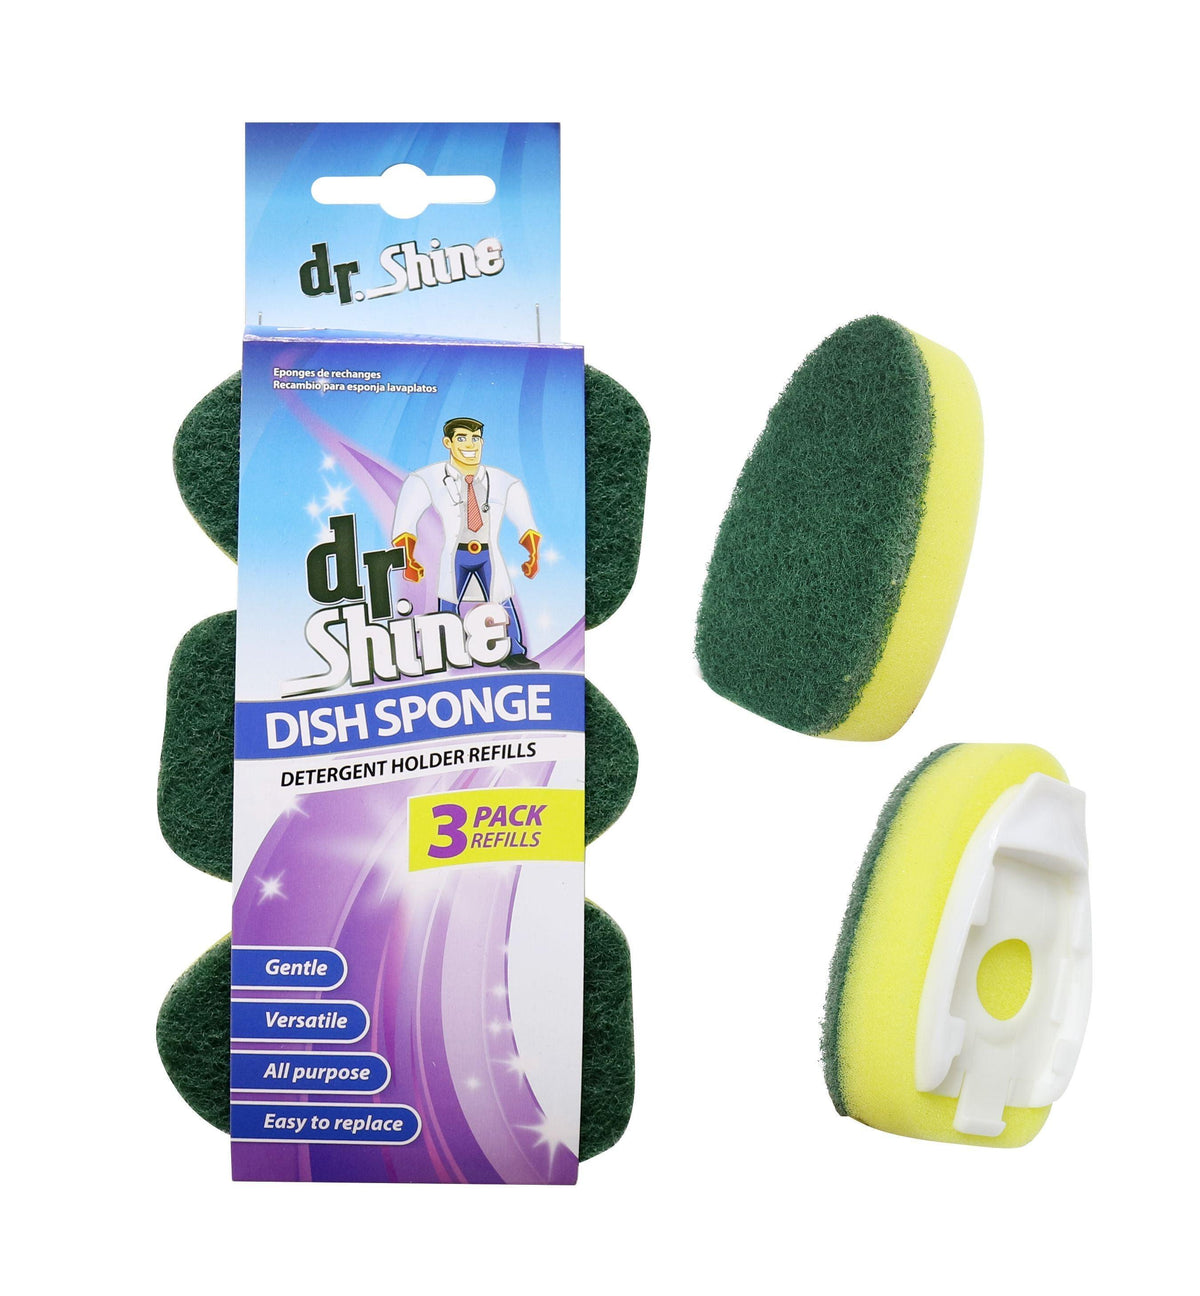 Dr Shine Dish Sponge Refill | 3 Pack - Choice Stores